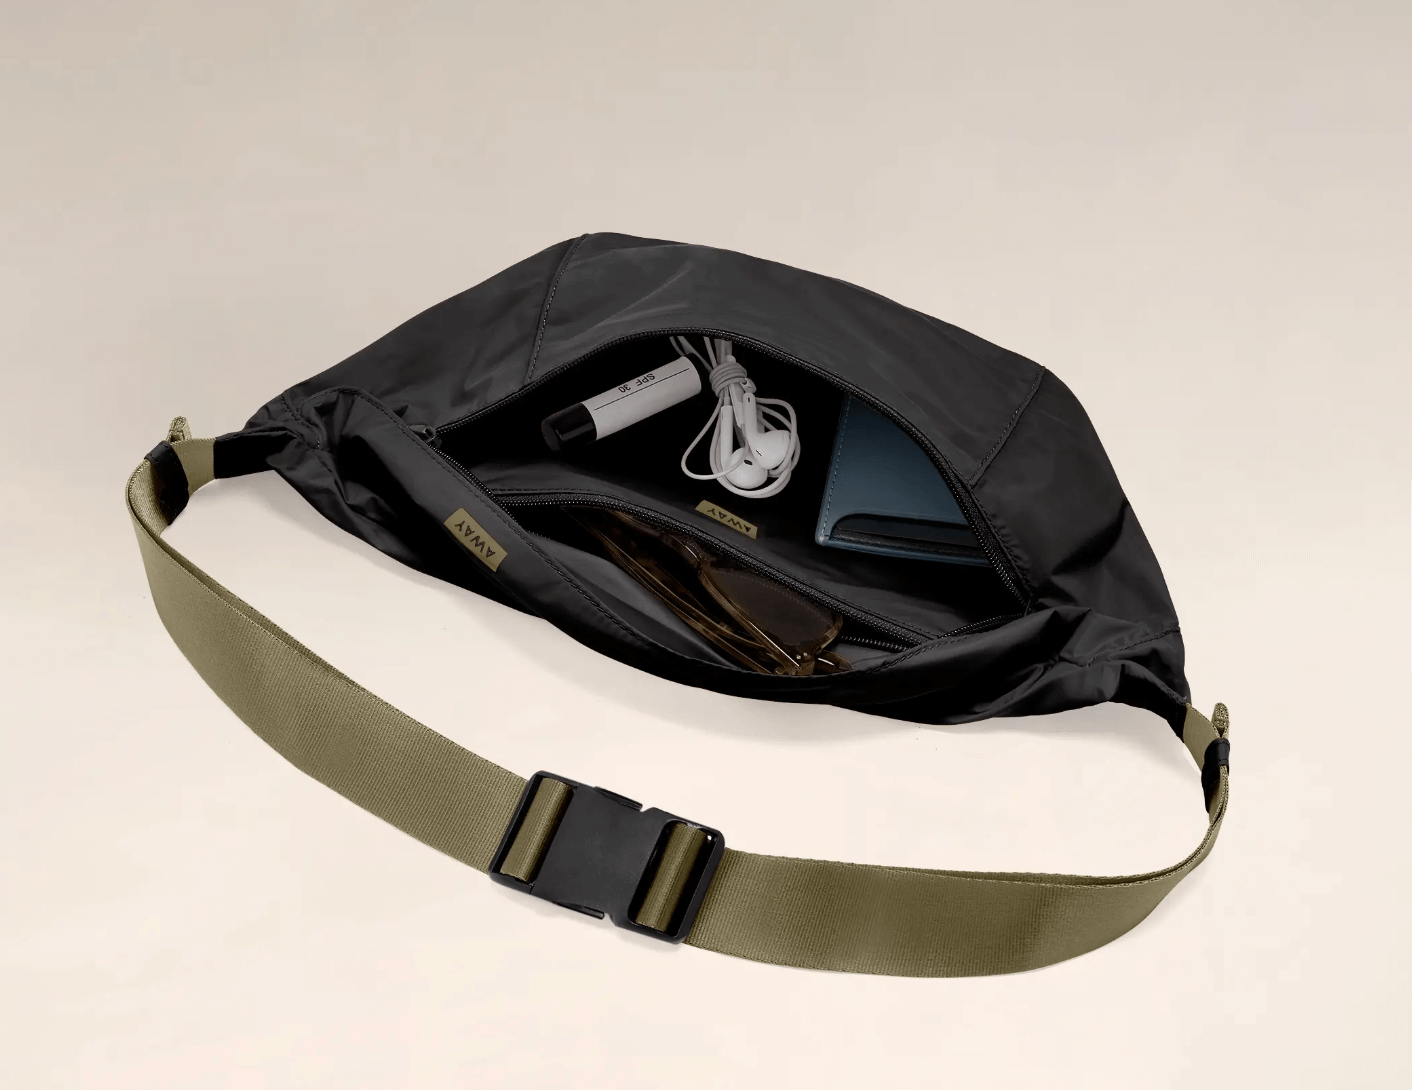 Away packable sling bag black nylon bag open zipper with wallet white headphones army green carrying strap